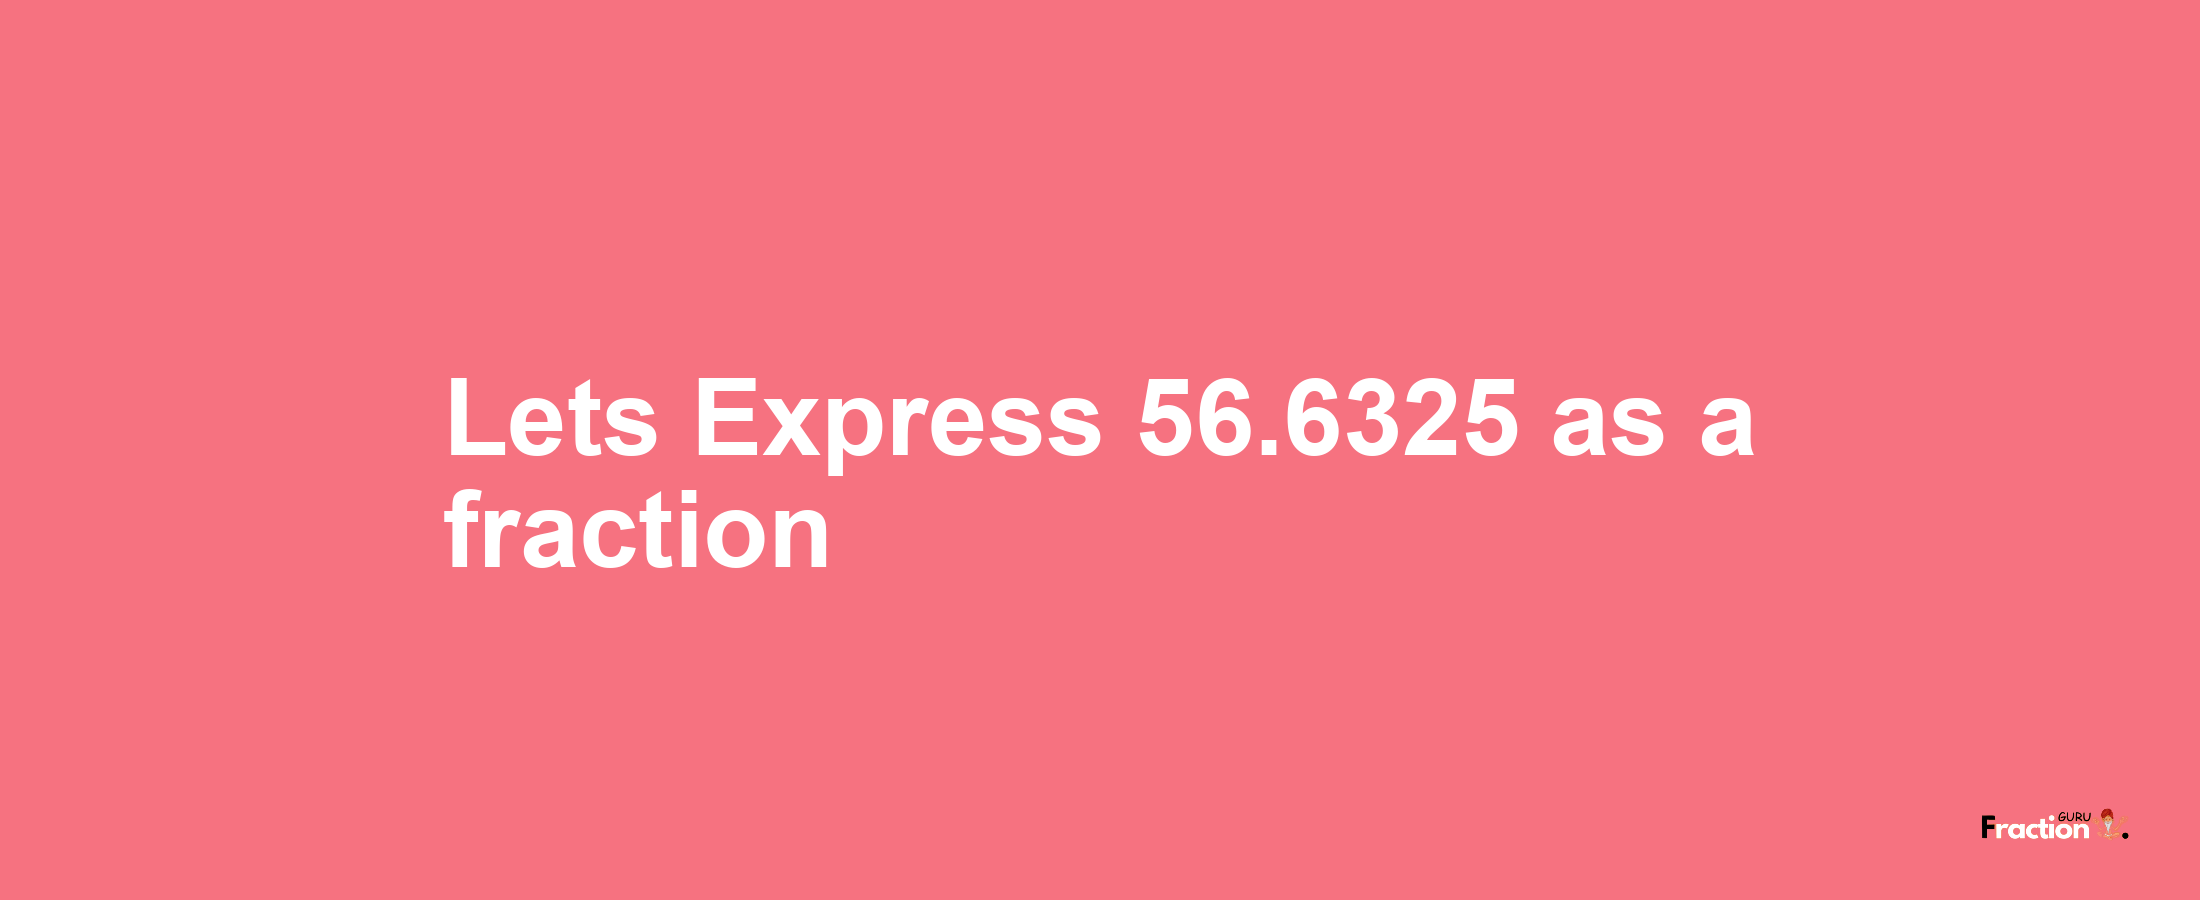 Lets Express 56.6325 as afraction